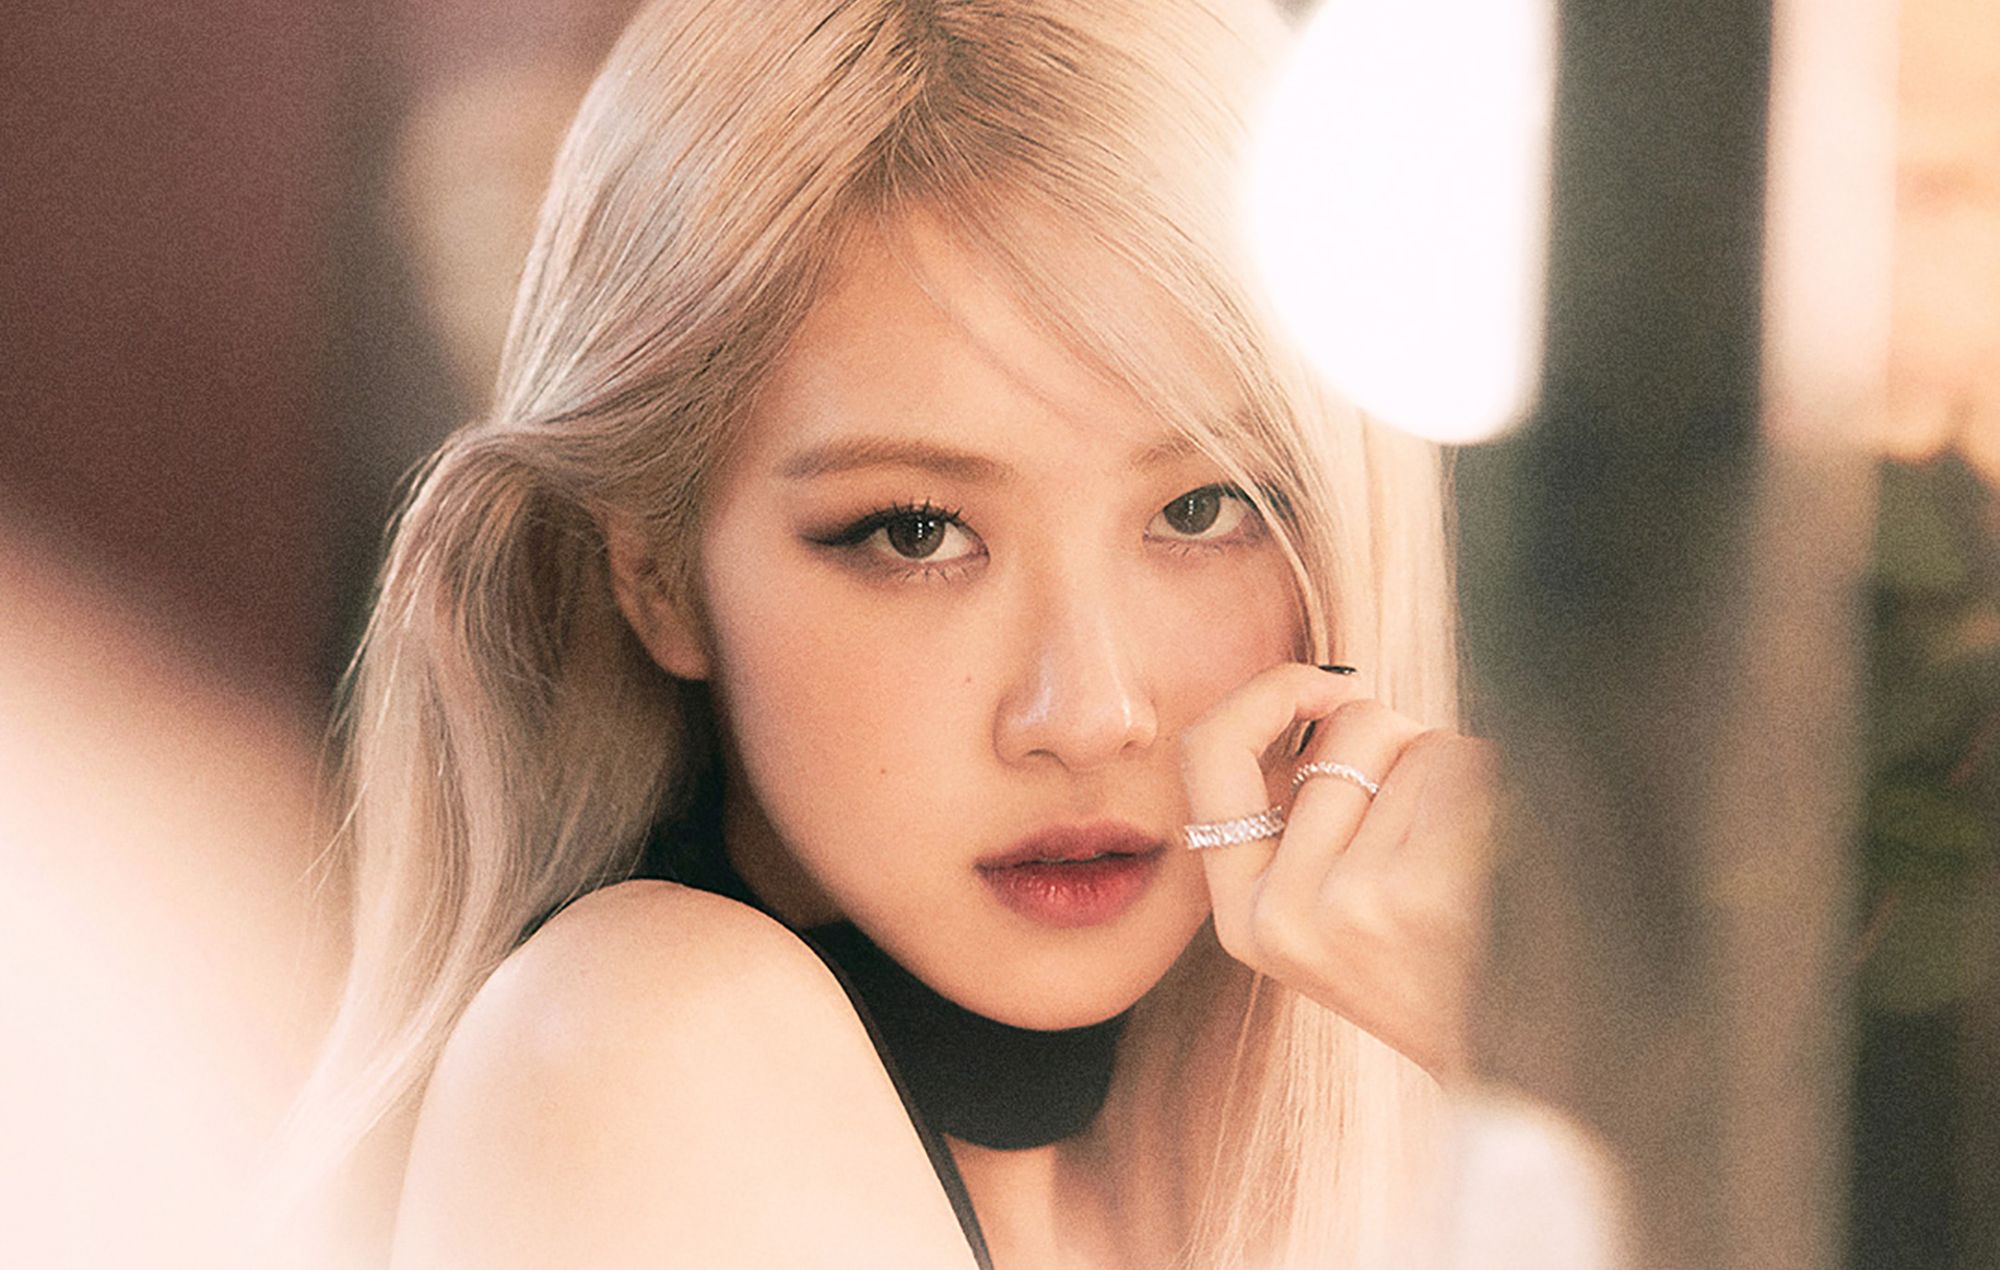 BLACKPINK's Rosé breaks new ground on Billboard charts with 'On The Ground'